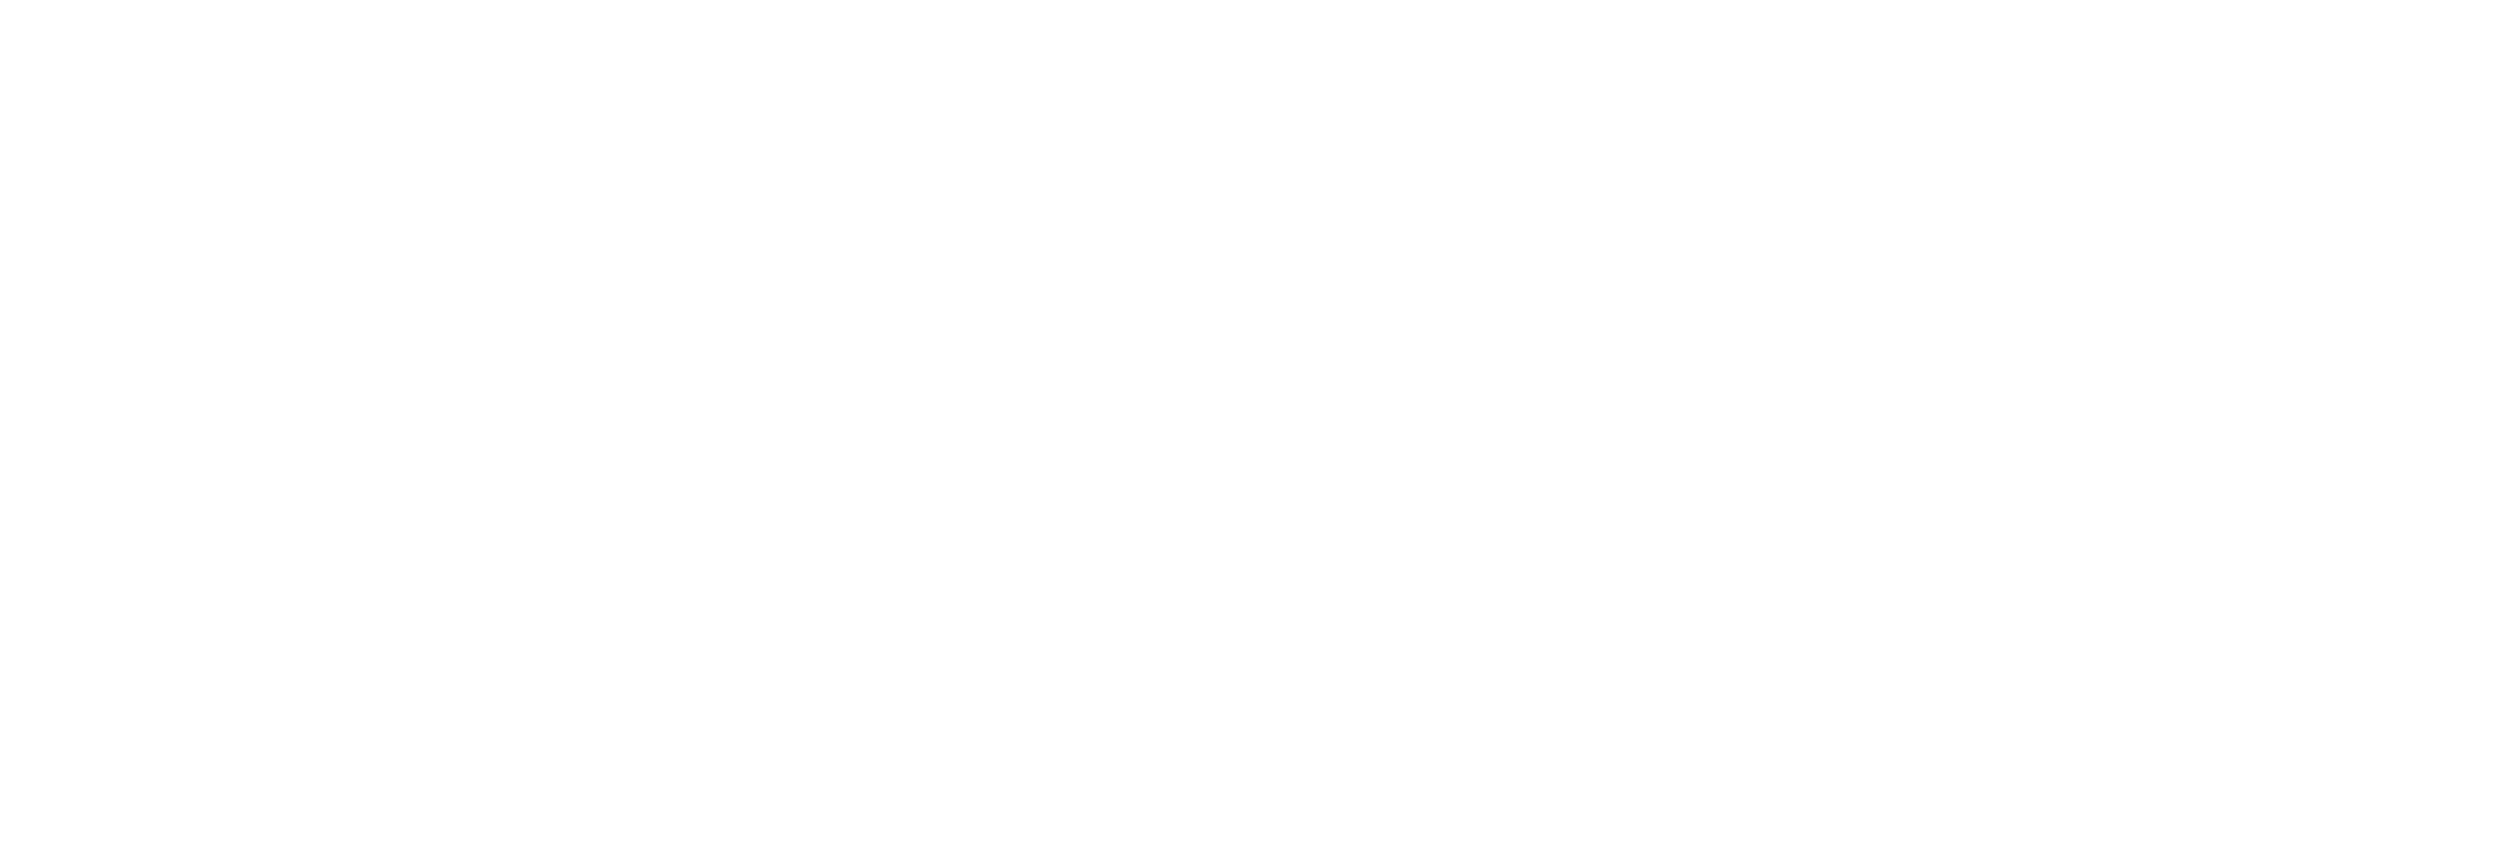 We The Nomads